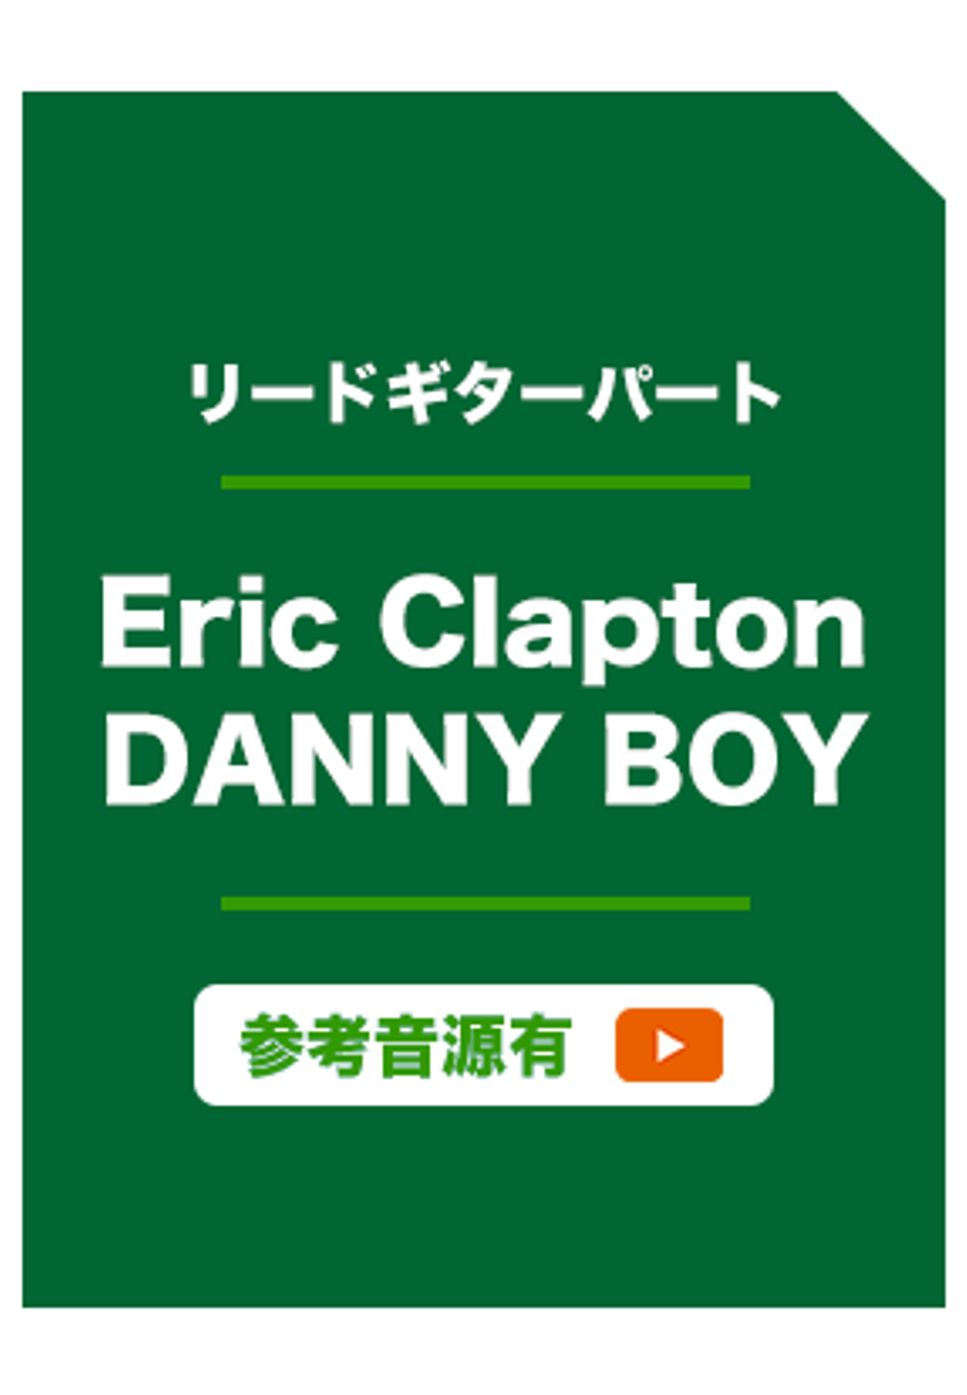 DANNY BOY (ギターソロ) by Eric Clapton